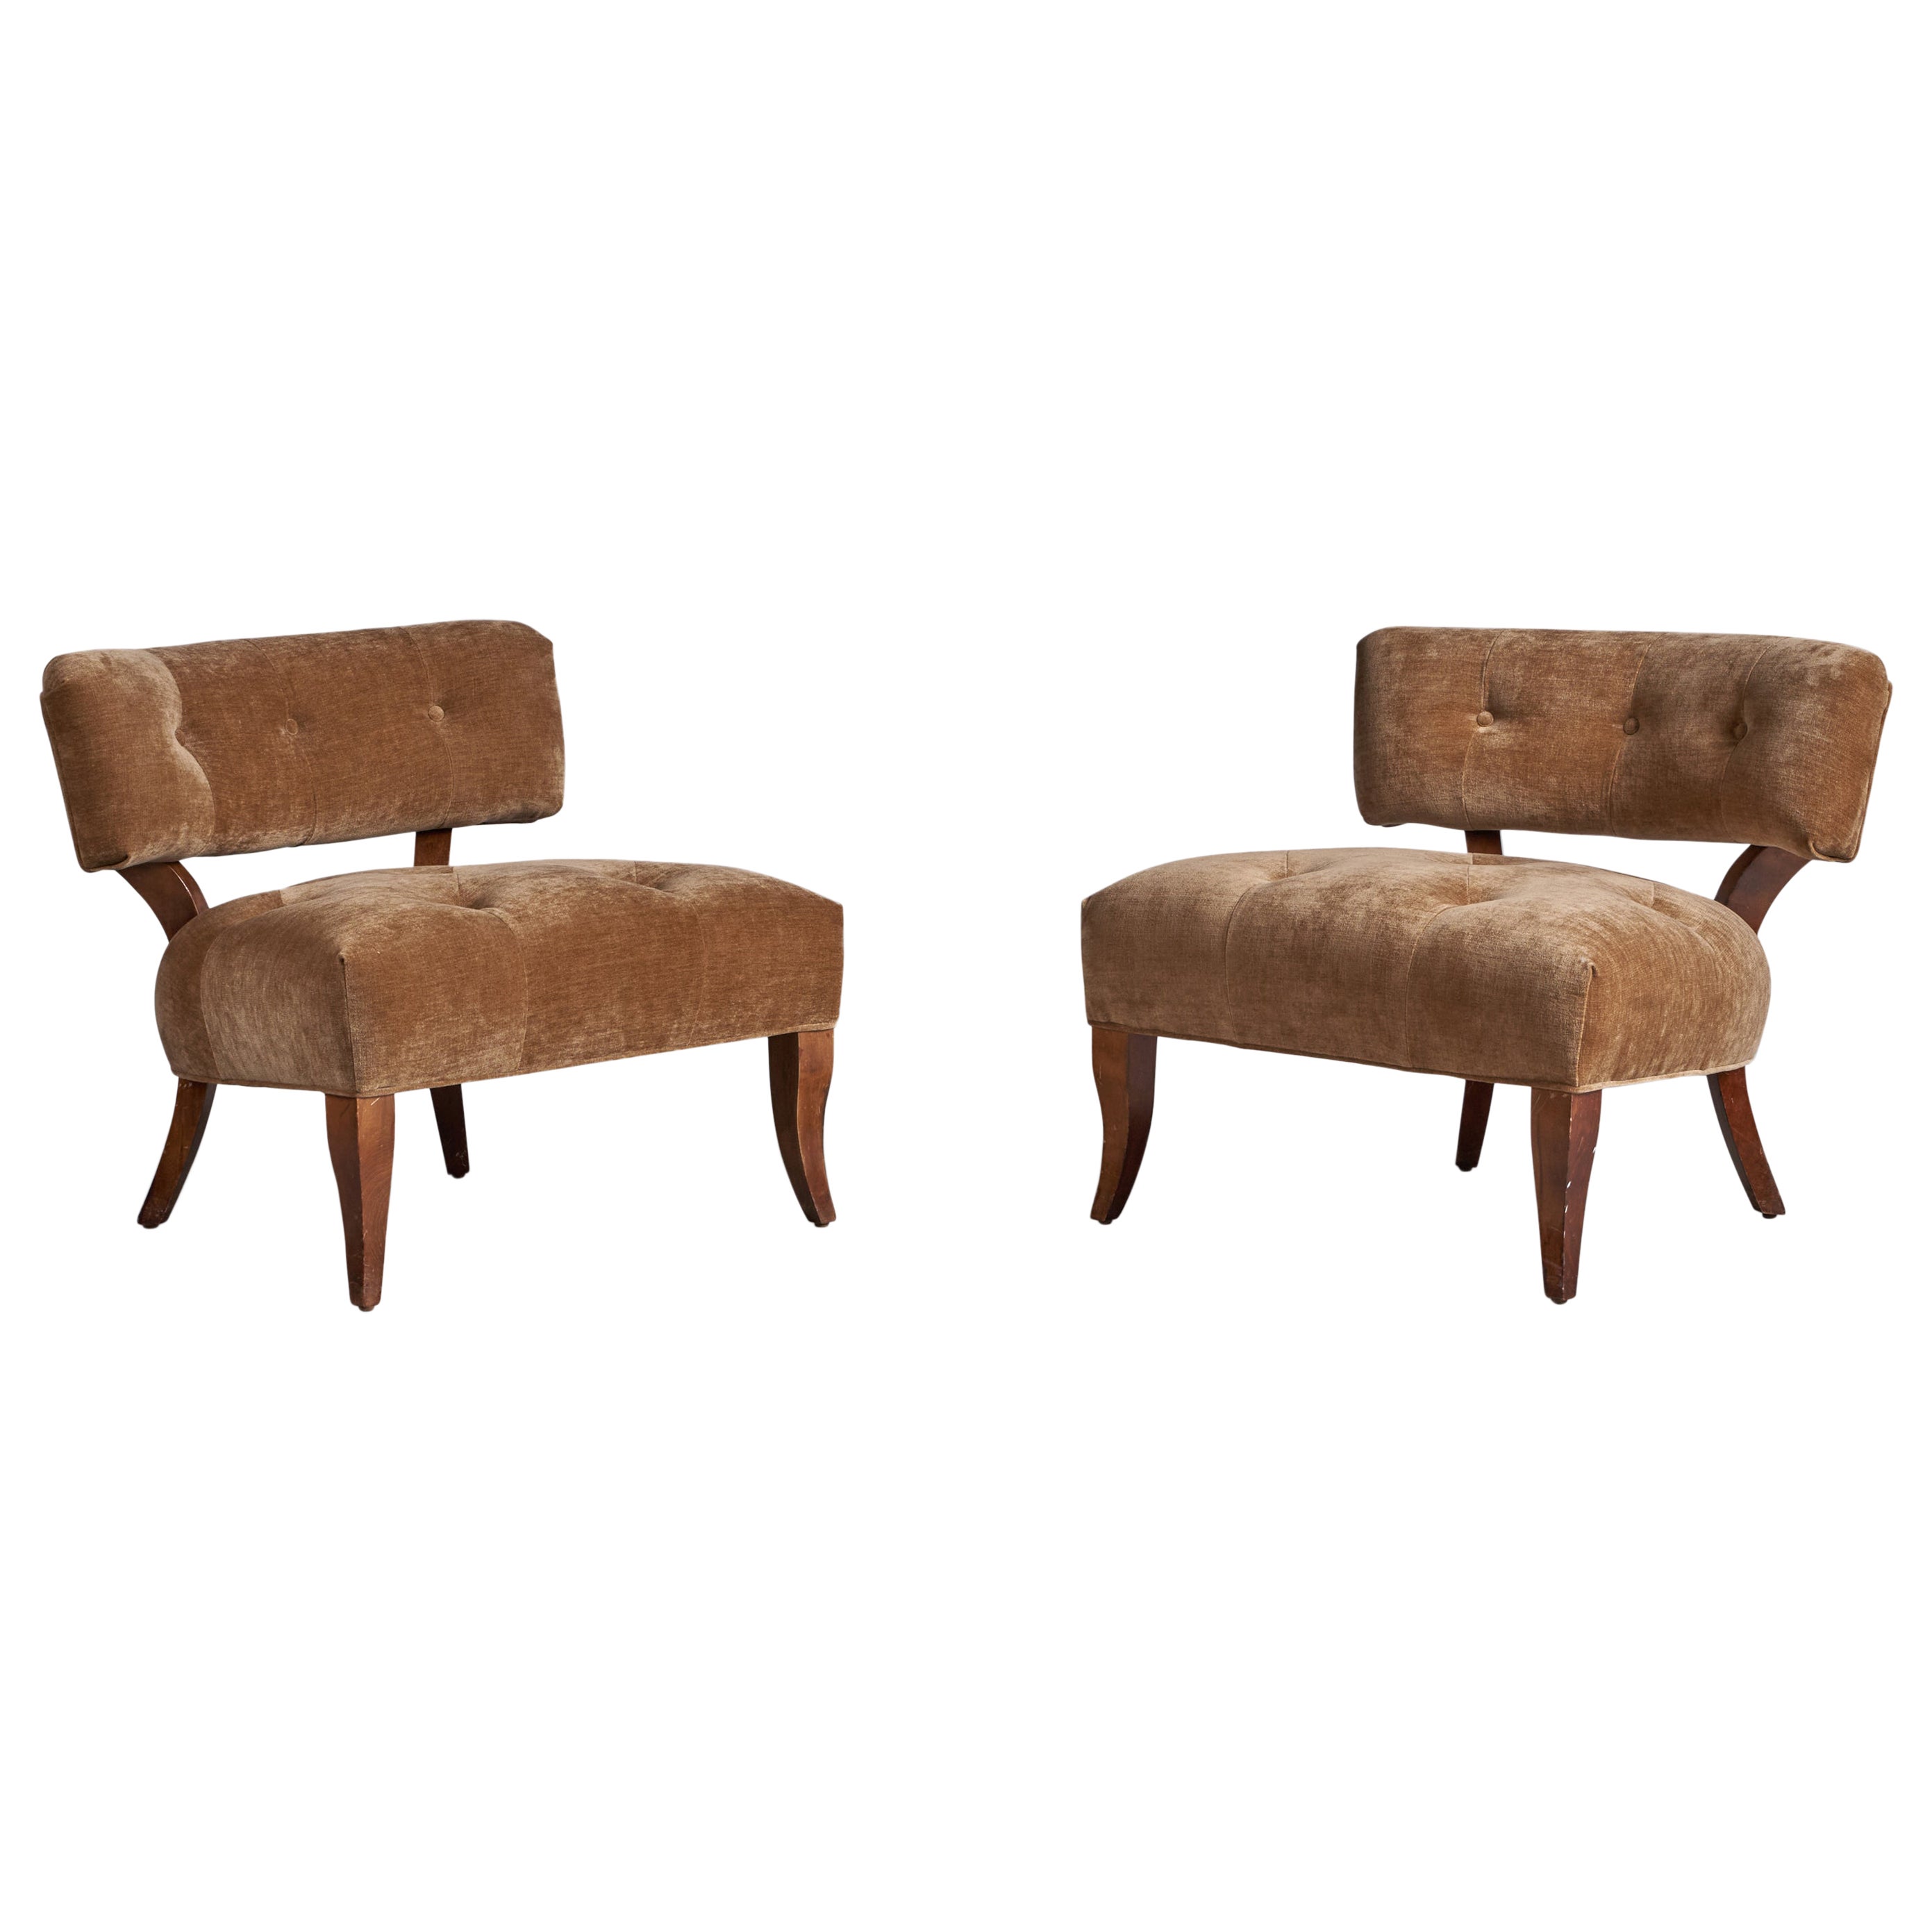 Billy Haines Attribution, Slipper Chairs, Wood, Velvet, USA, 1940s For Sale